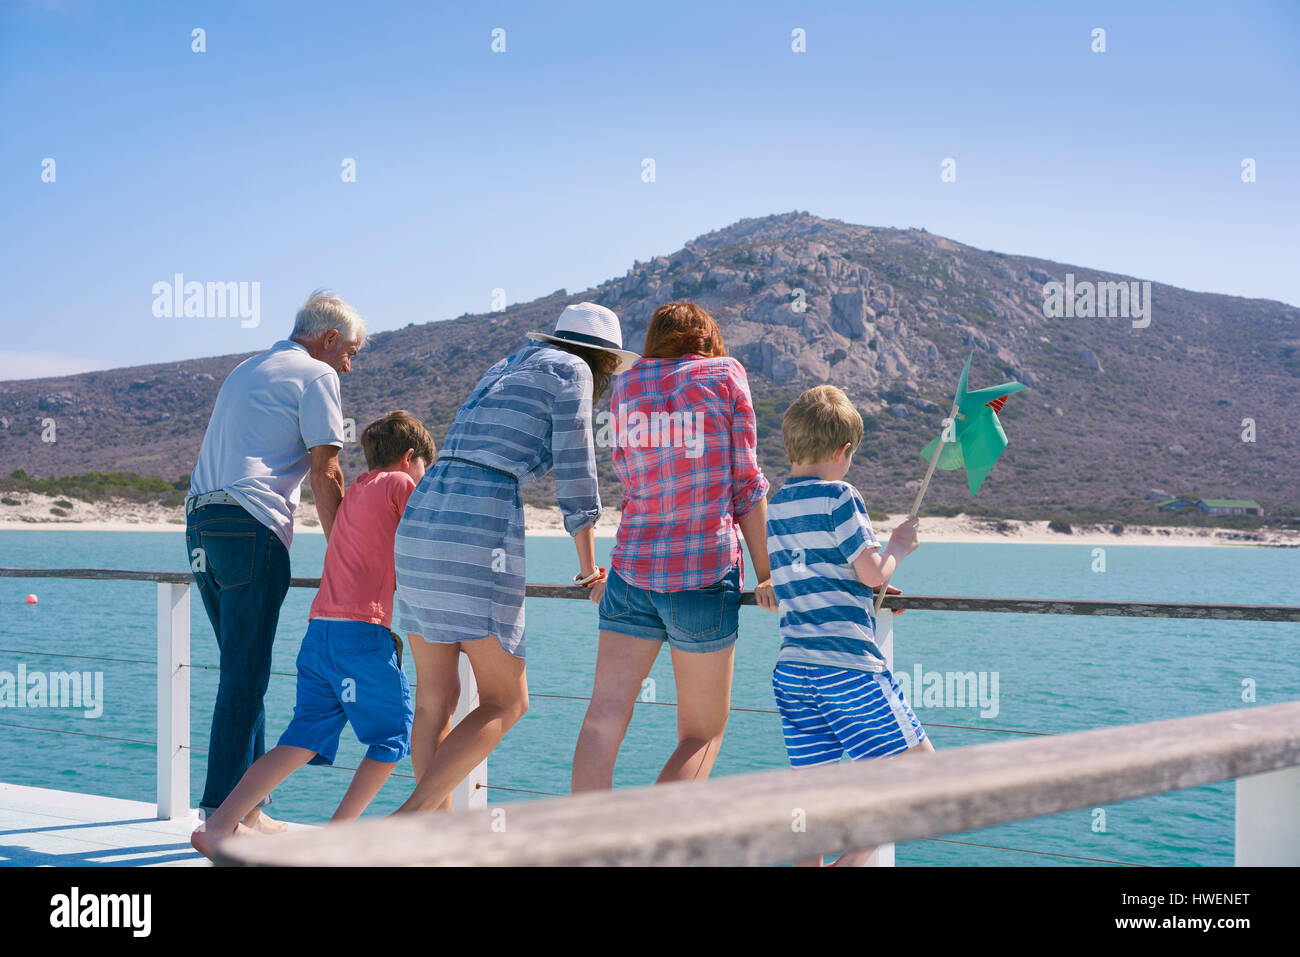 Family on houseboat looking away at view, Kraalbaai, South Africa Stock Photo